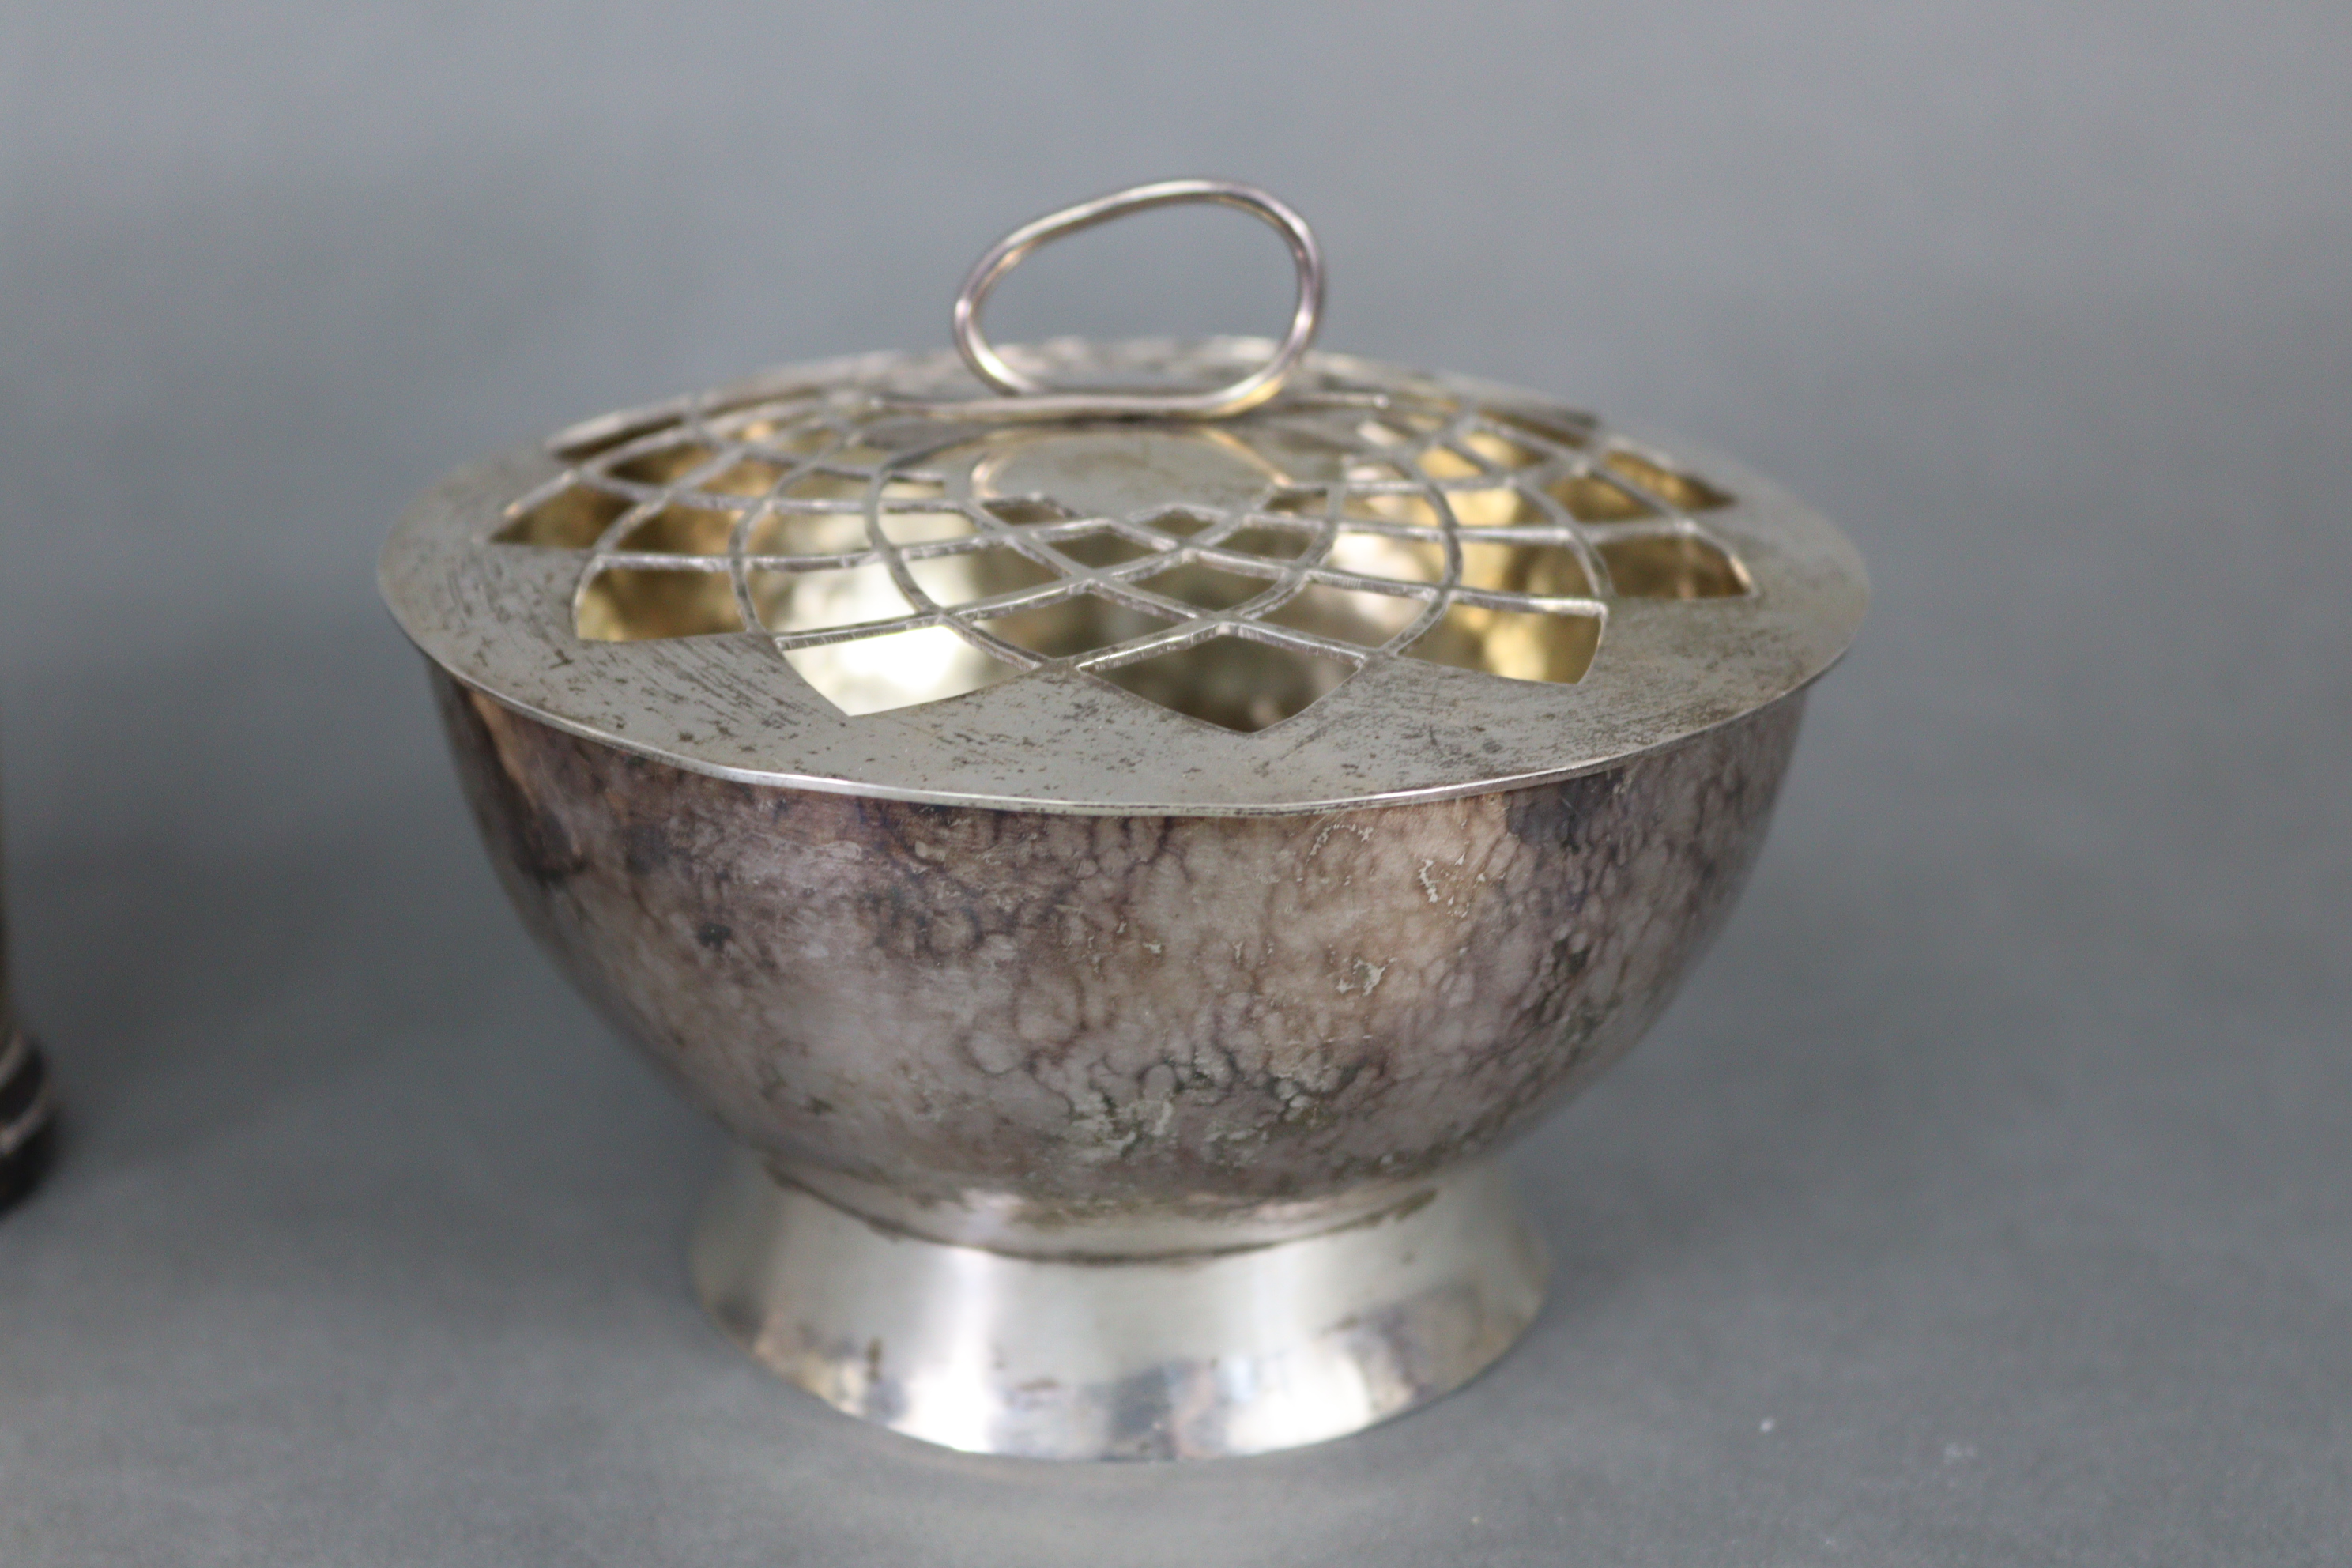 A collection of modern silver items, all made by a “G. Reddyhoff”, comprising: a circular bowl - Image 2 of 20